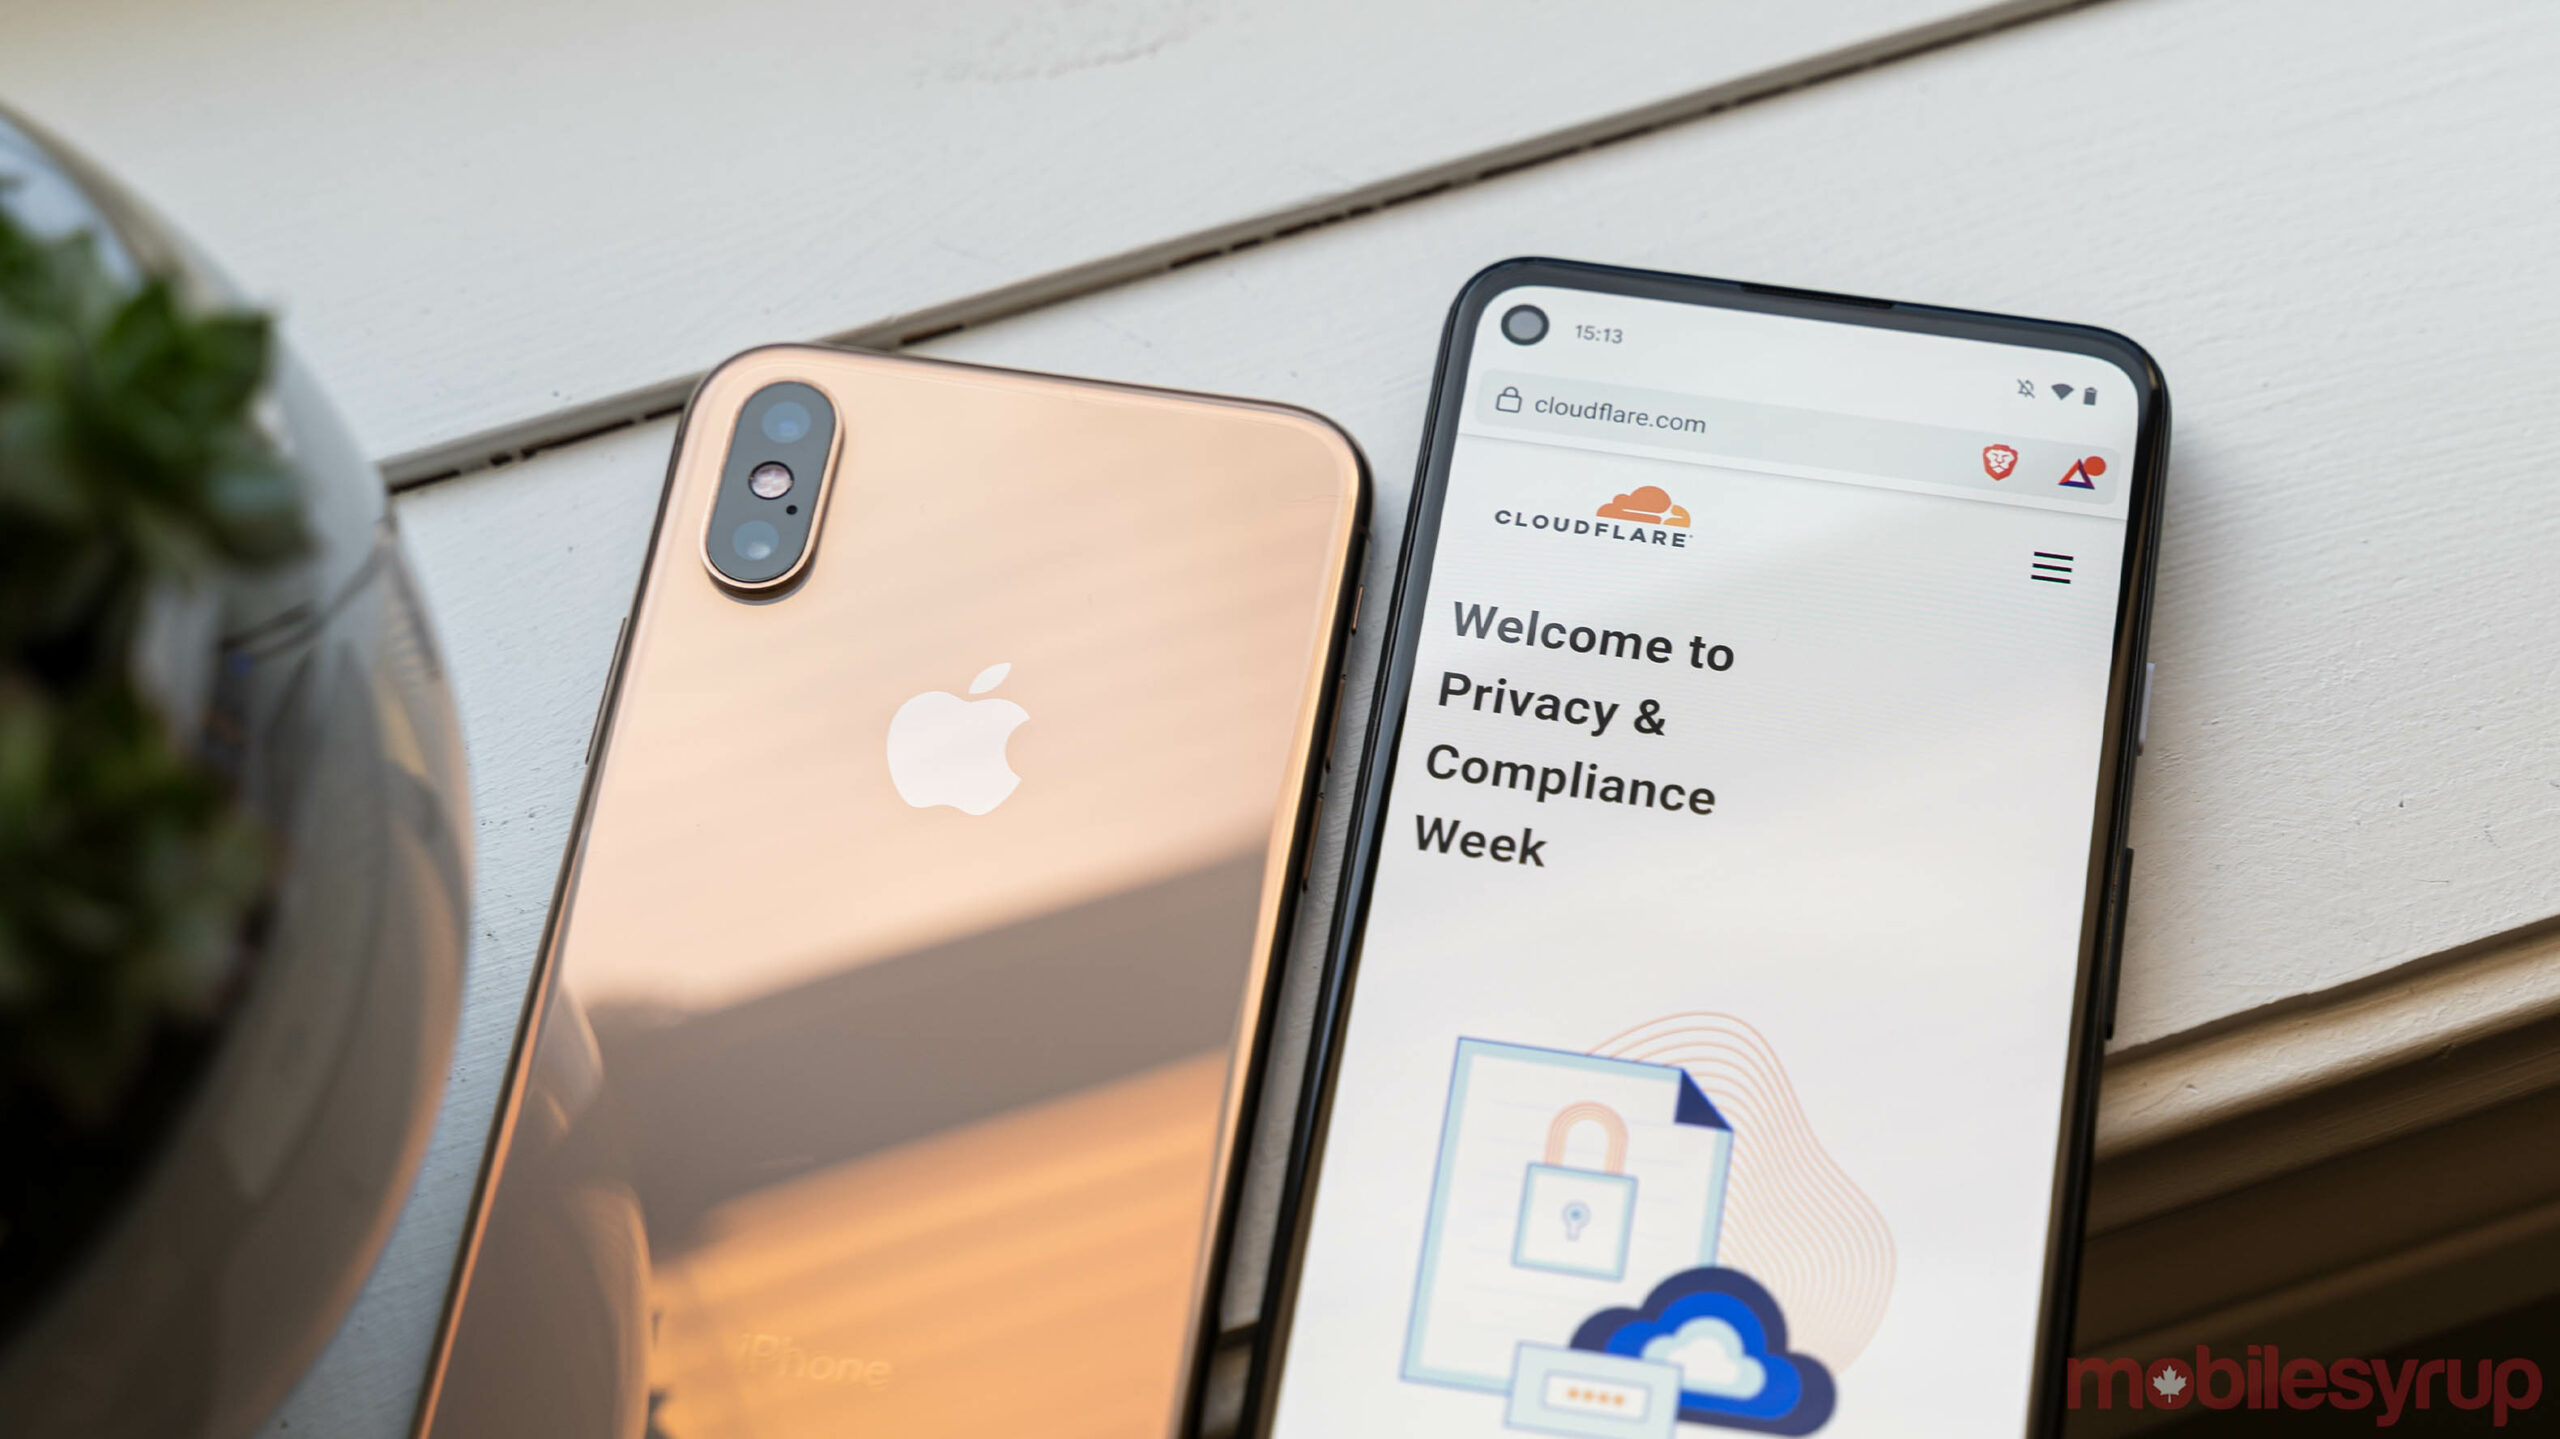 iPhone and Cloudflare website